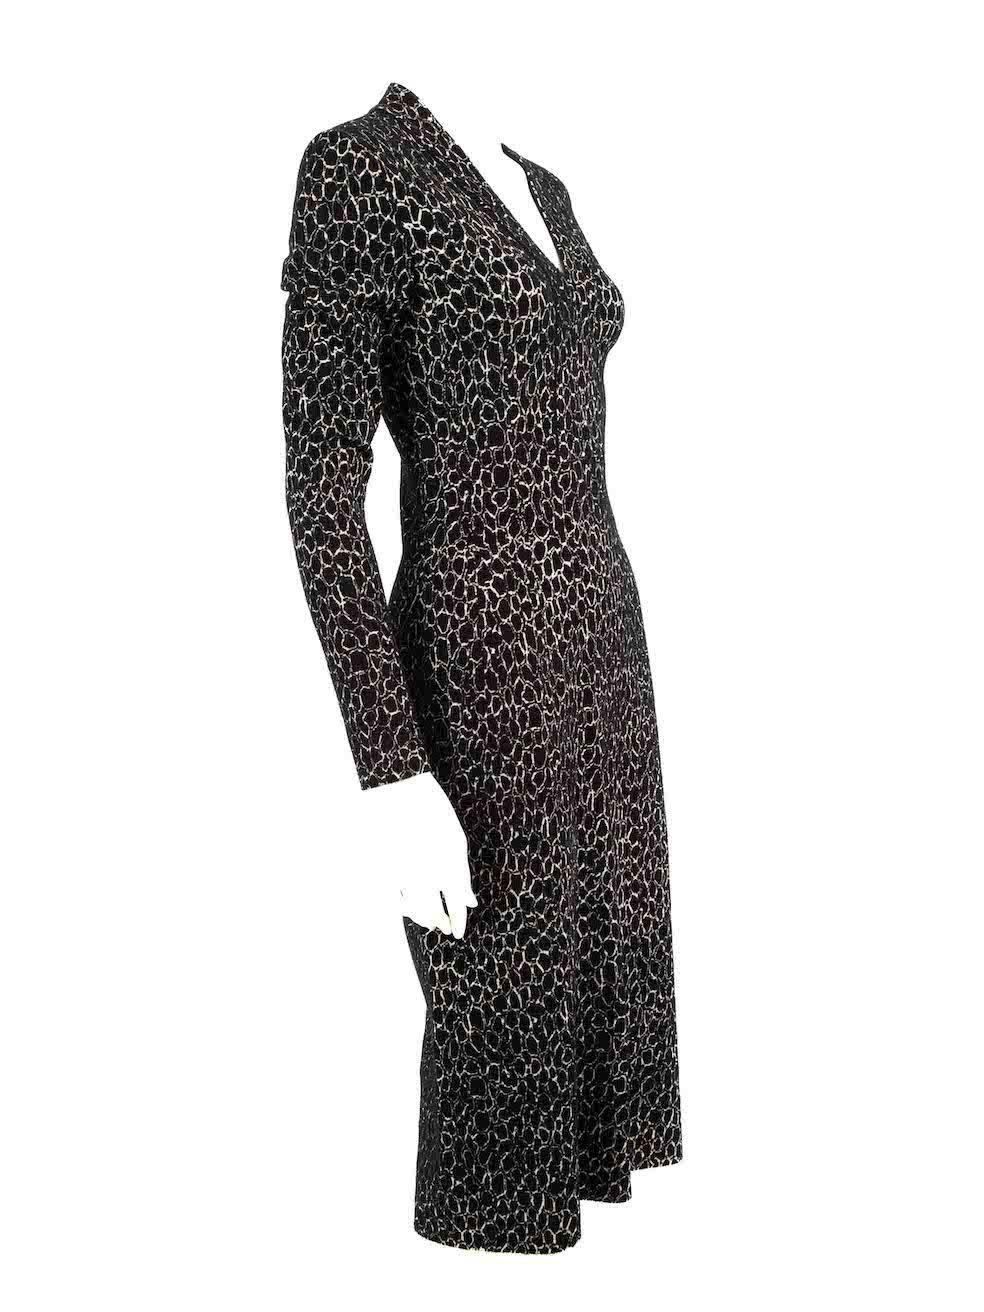 CONDITION is Very good. Hardly any visible wear to dress is evident on this used Alaïa designer resale item.
 
 
 
 Details
 
 
 Black
 
 Viscose
 
 Knit dress
 
 Abstract pattern
 
 V-neck
 
 Long sleeves
 
 Stretchy
 
 Figure hugging fit
 
 Midi
